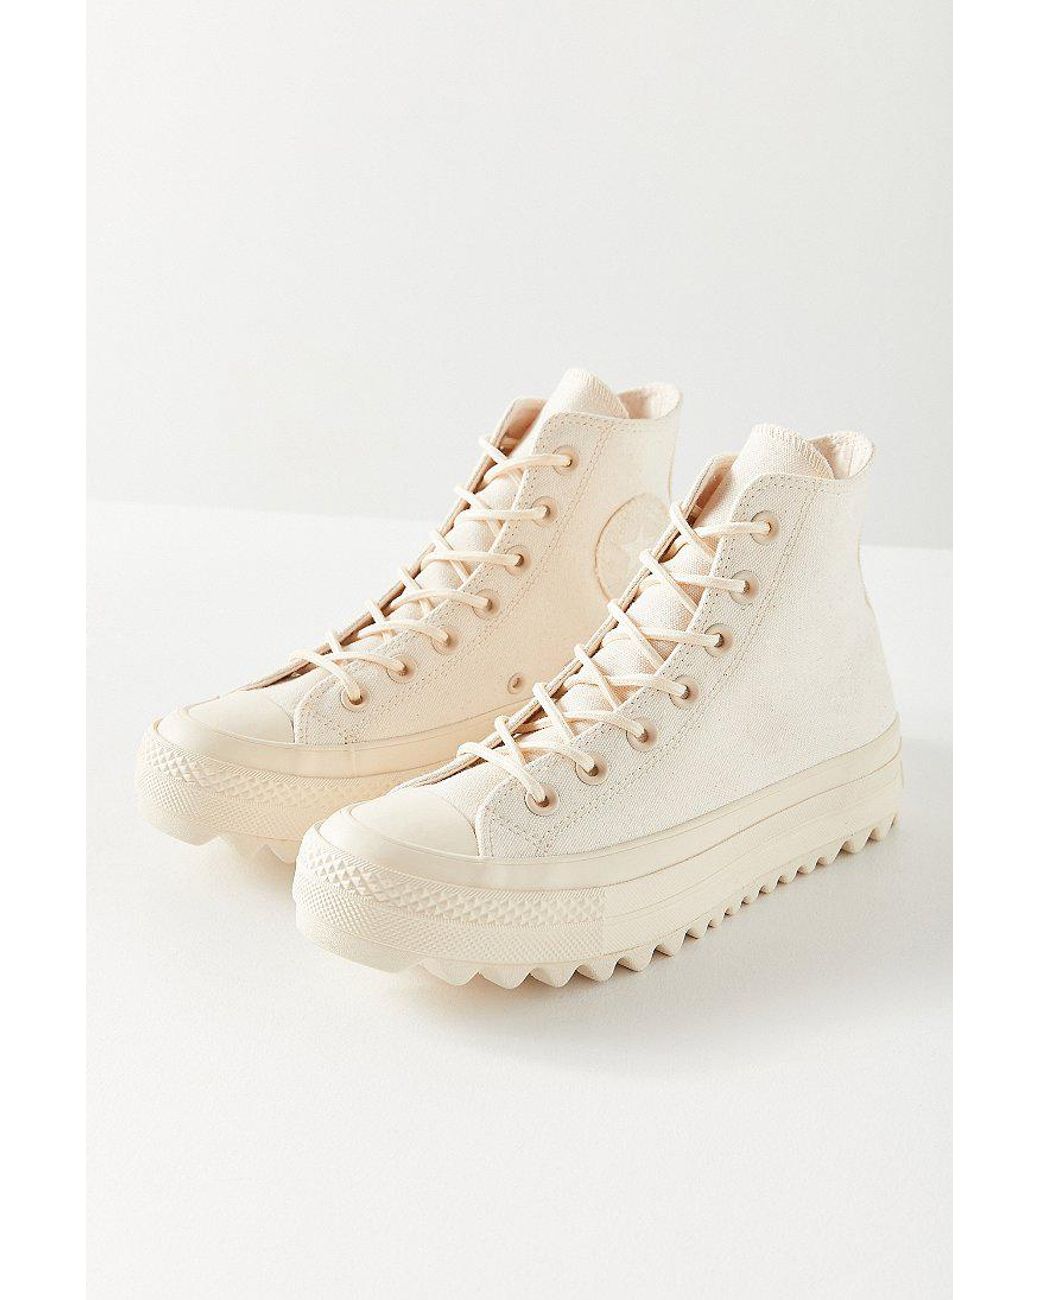 Converse Chuck Taylor All Star Lift Ripple Ivory High Top Trainers in White  | Lyst